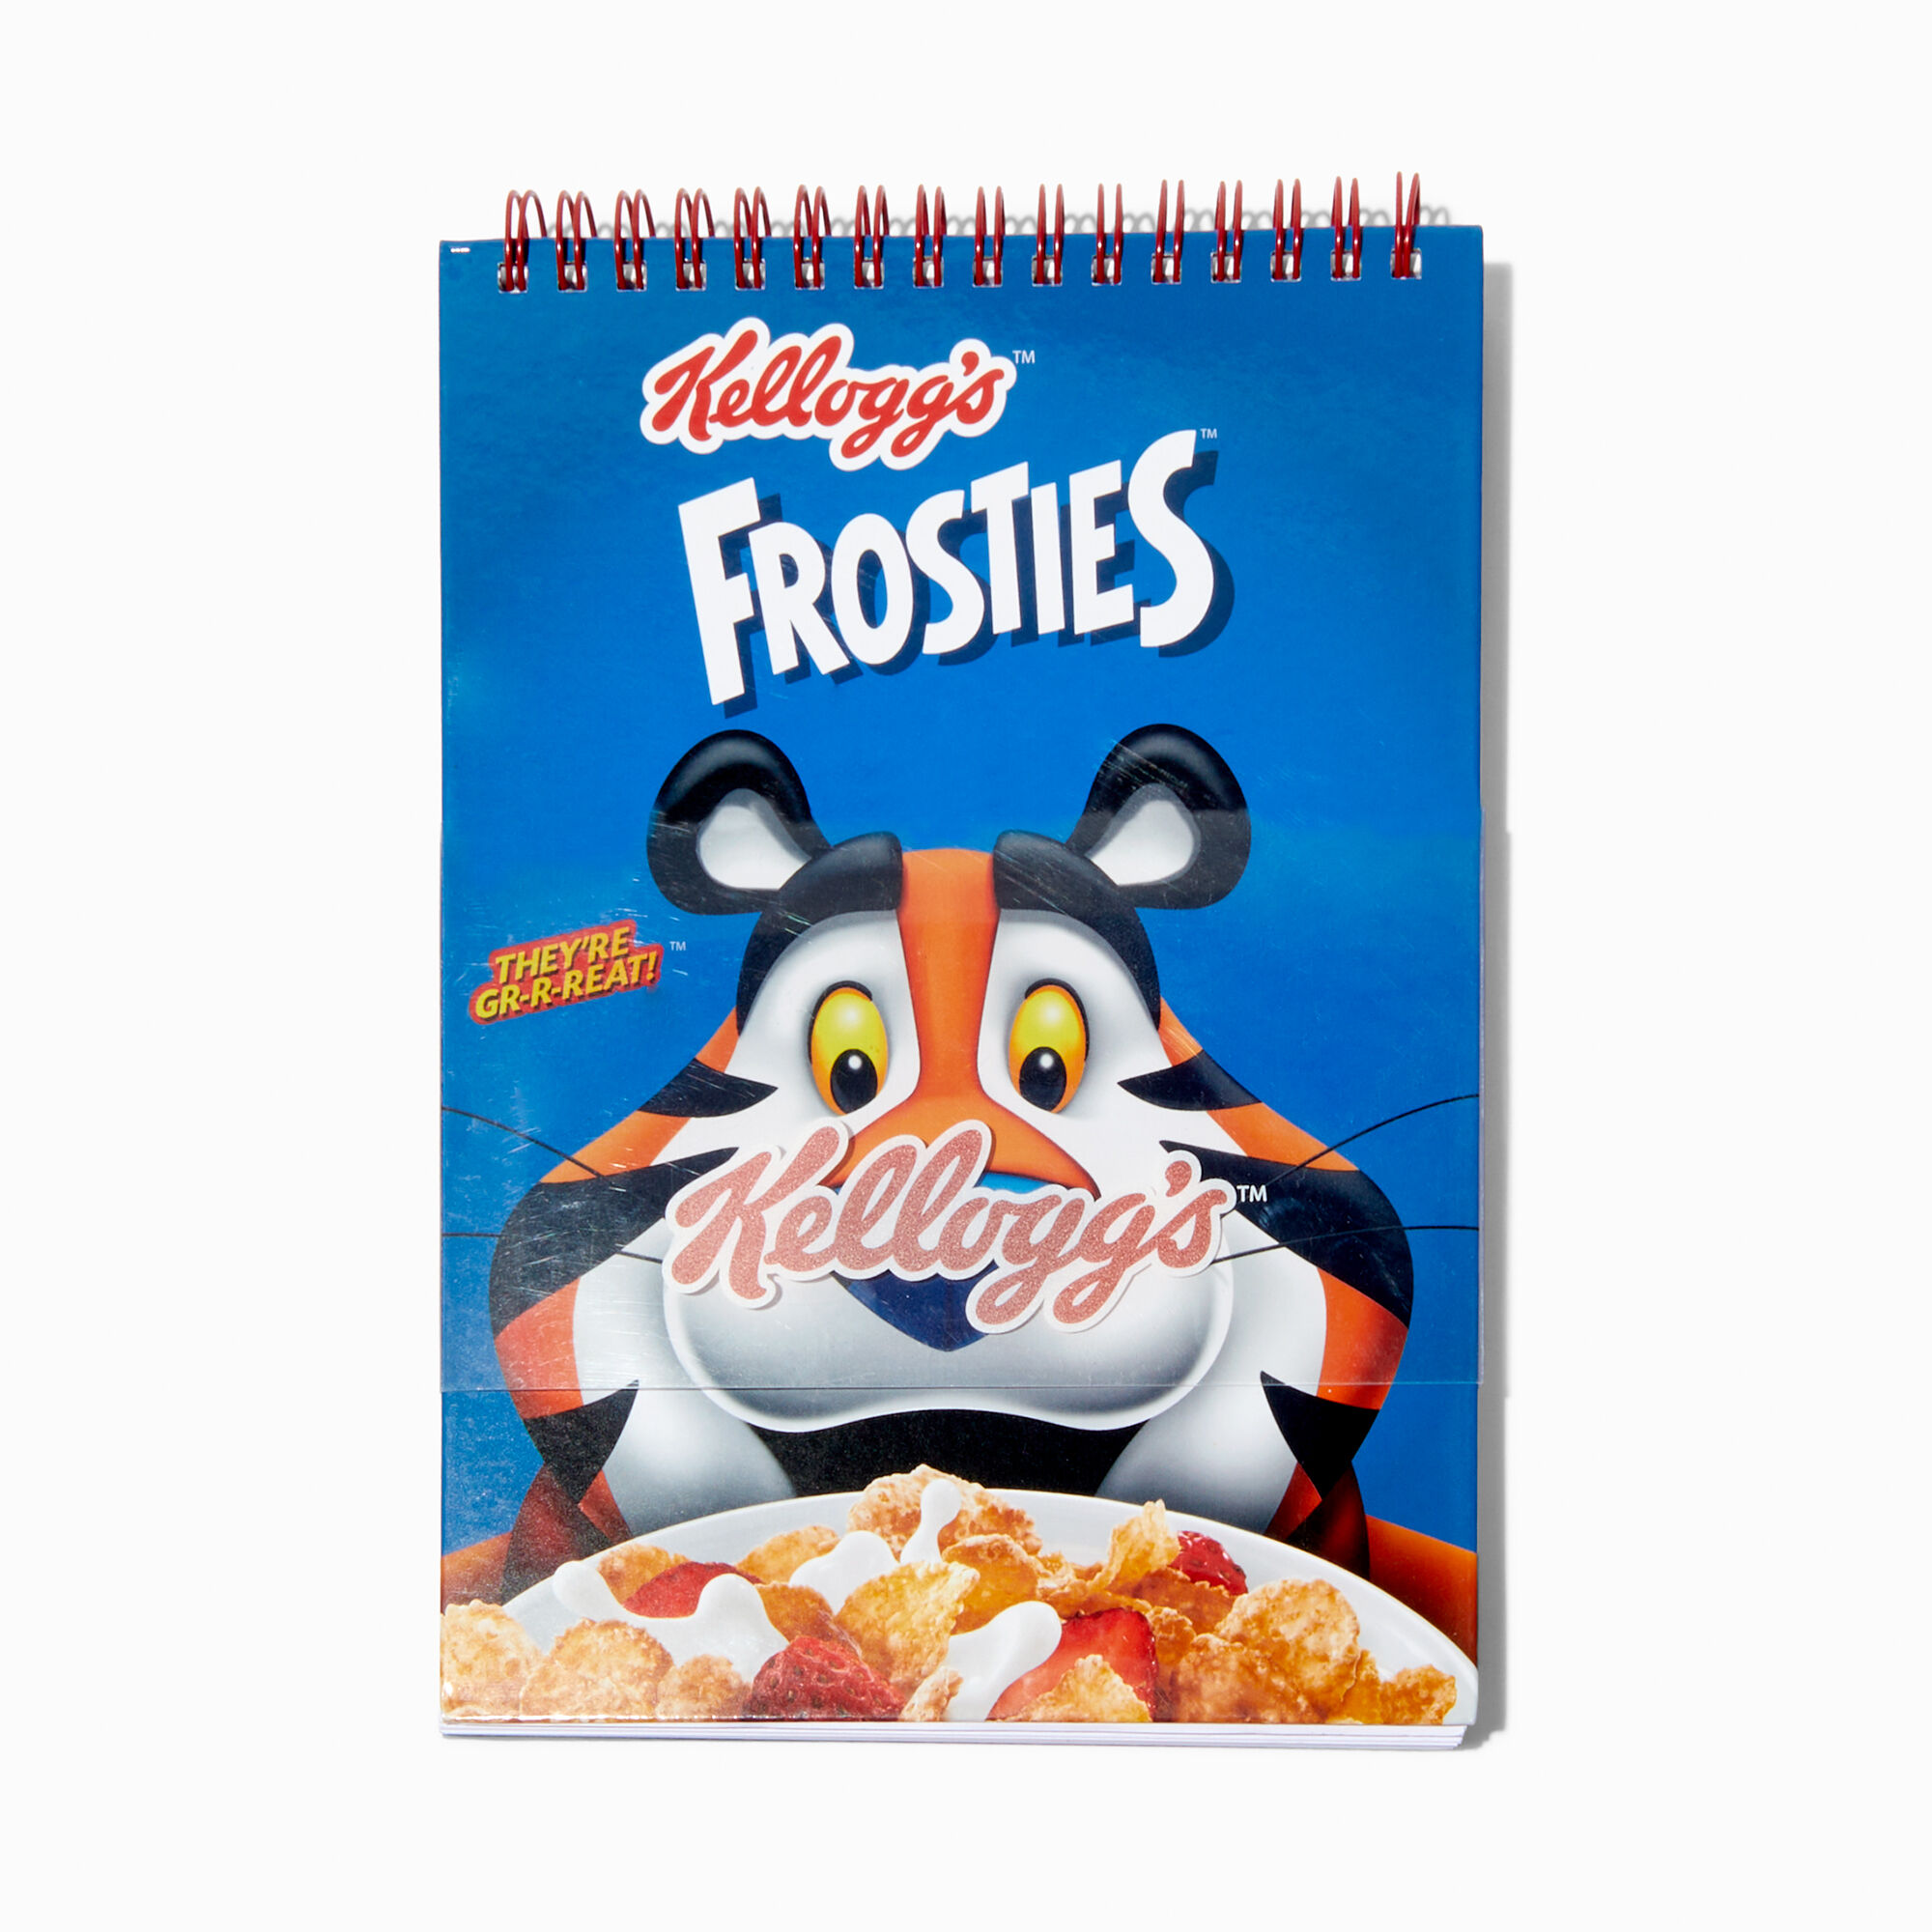 View Claires Kellogs Frosties Notepad information